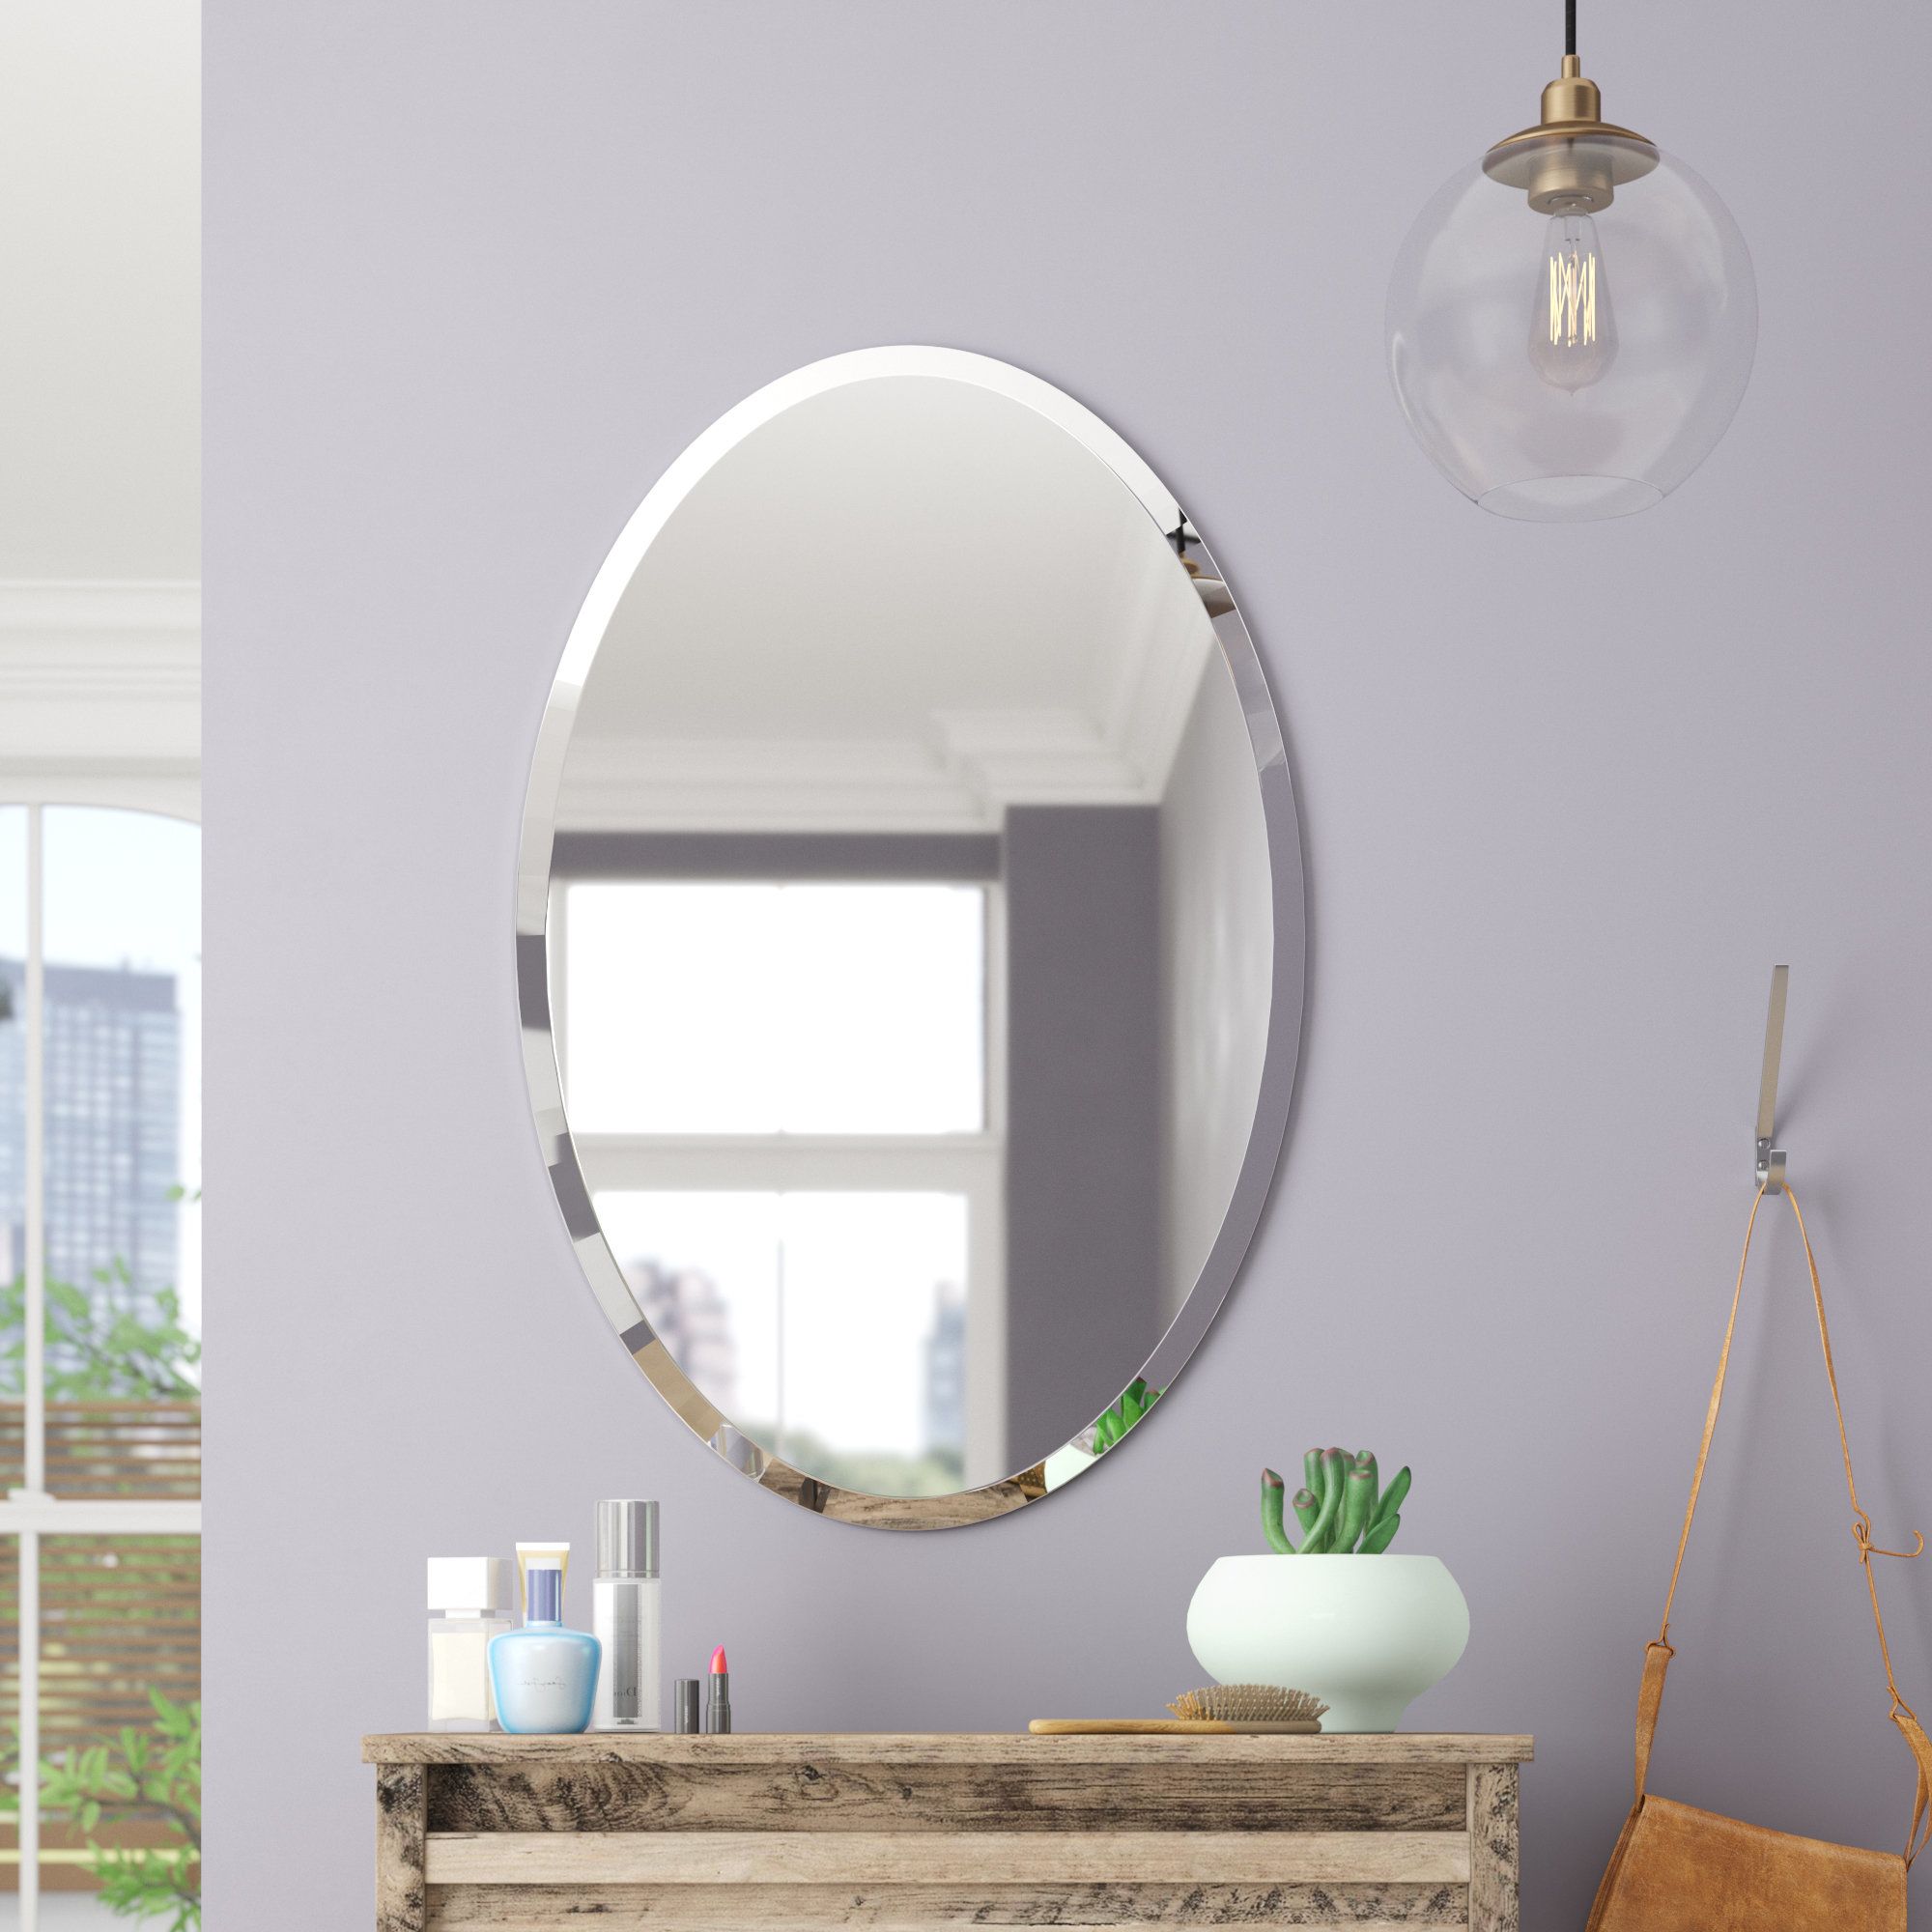 Sajish Oval Crystal Wall Mirrors In Most Current Thornbury Oval Bevel Frameless Wall Mirror (View 4 of 20)